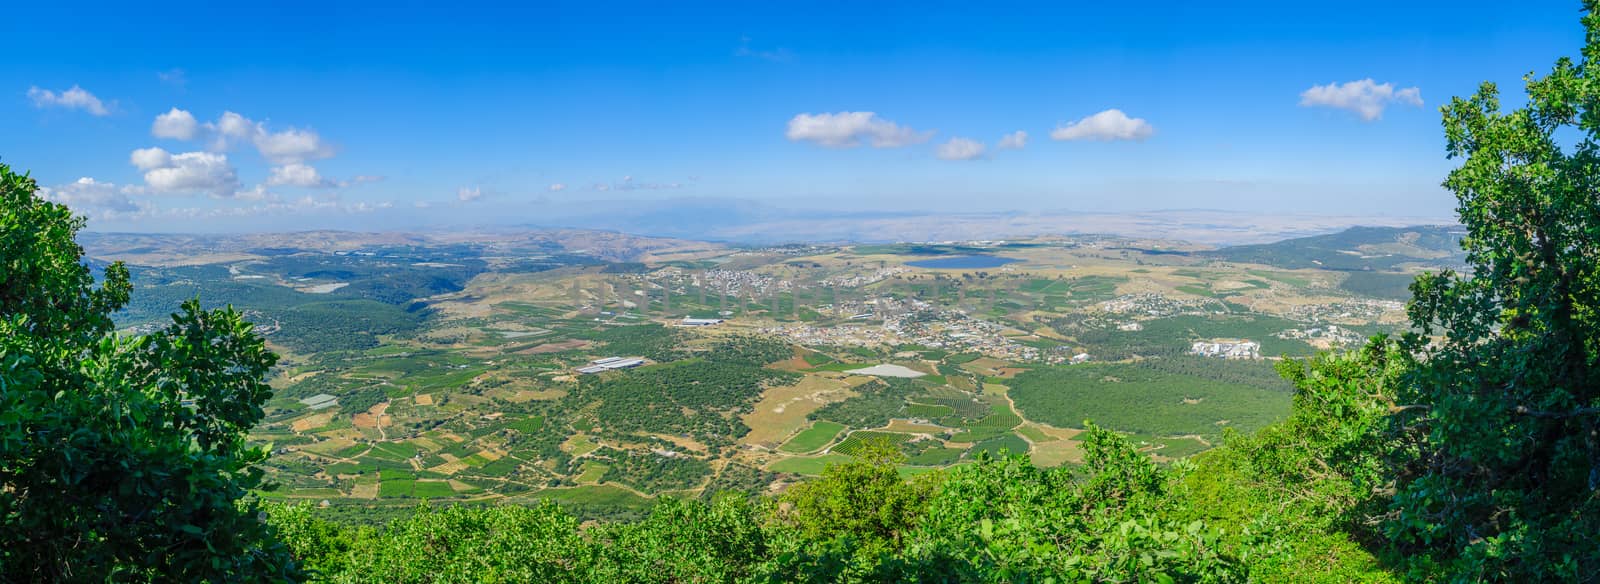 Panoramic landscape from Mount Meron in the upper Galilee by RnDmS